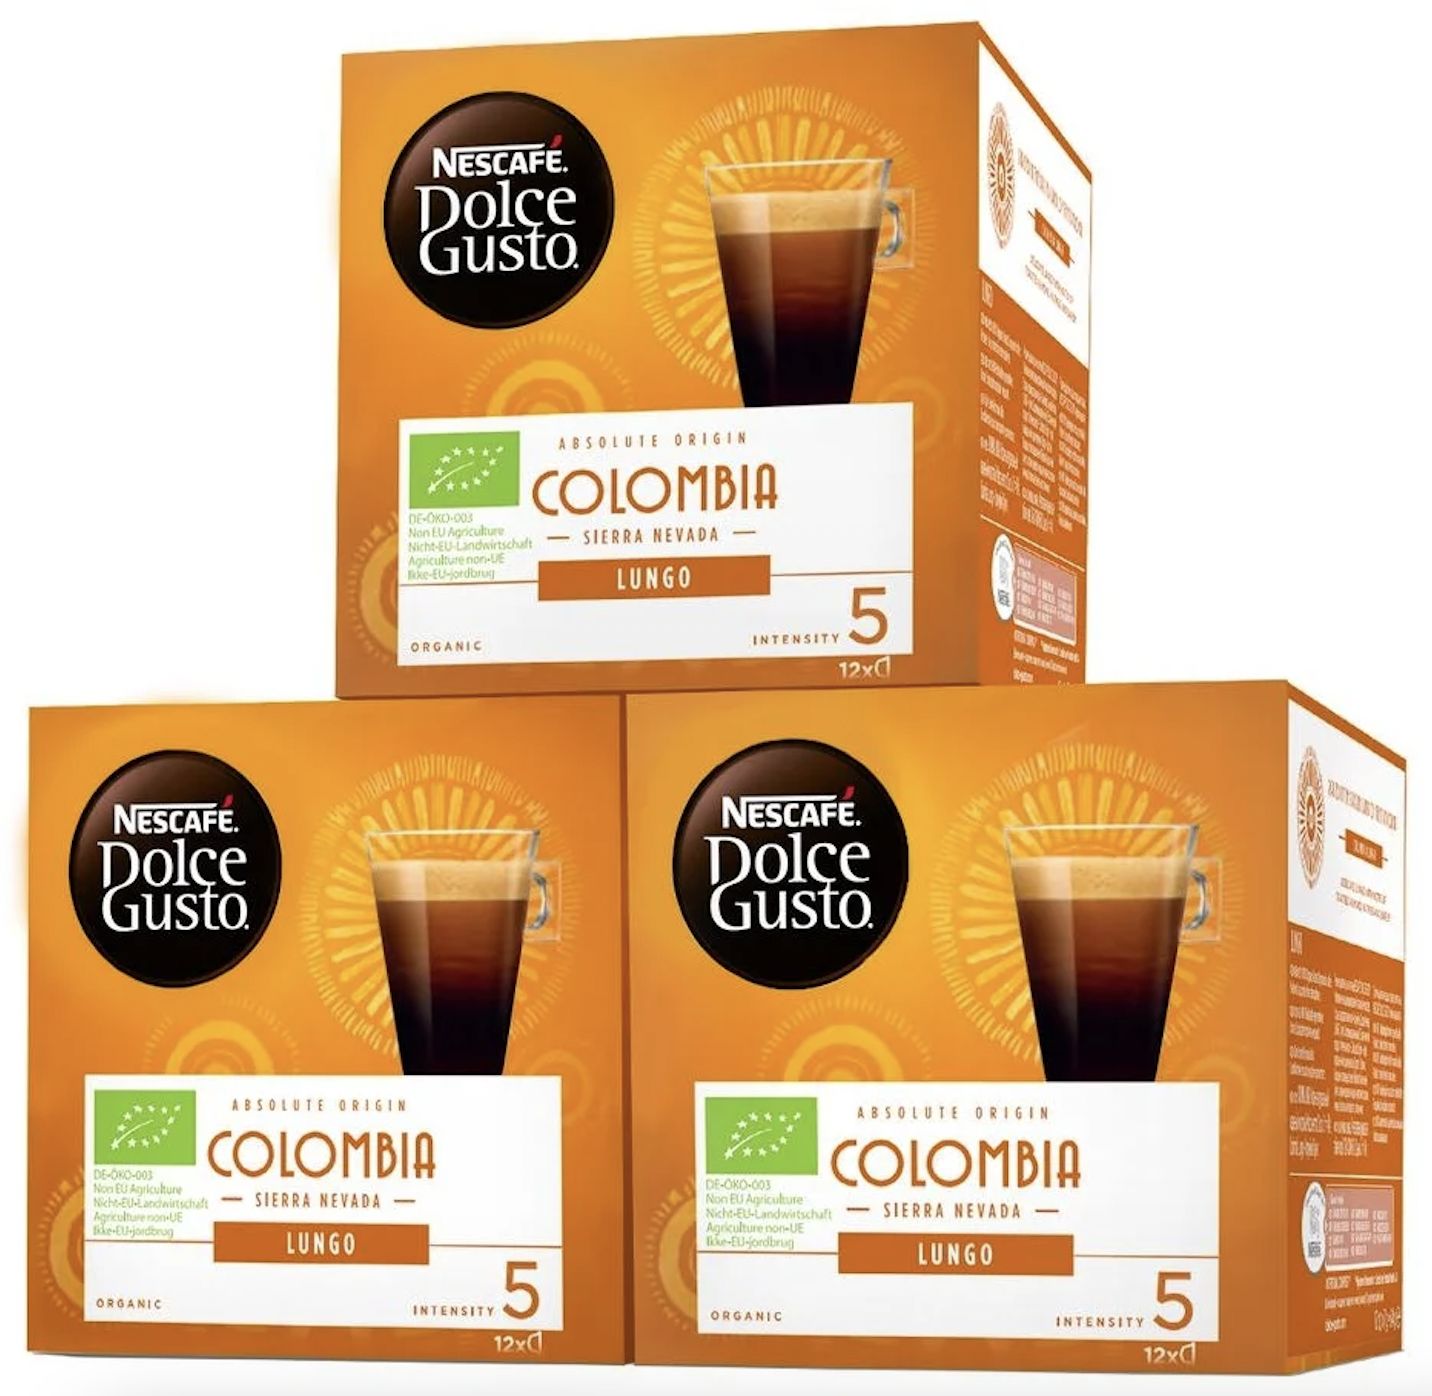 Dolce gusto дешево. Кофе в капсулах Nescafe Dolce gusto lungo. Капсулы Дольче густо lungo. Lungo Colombia Дольче густо. Капсулы для кофемашины lungo, Dolce gusto,.